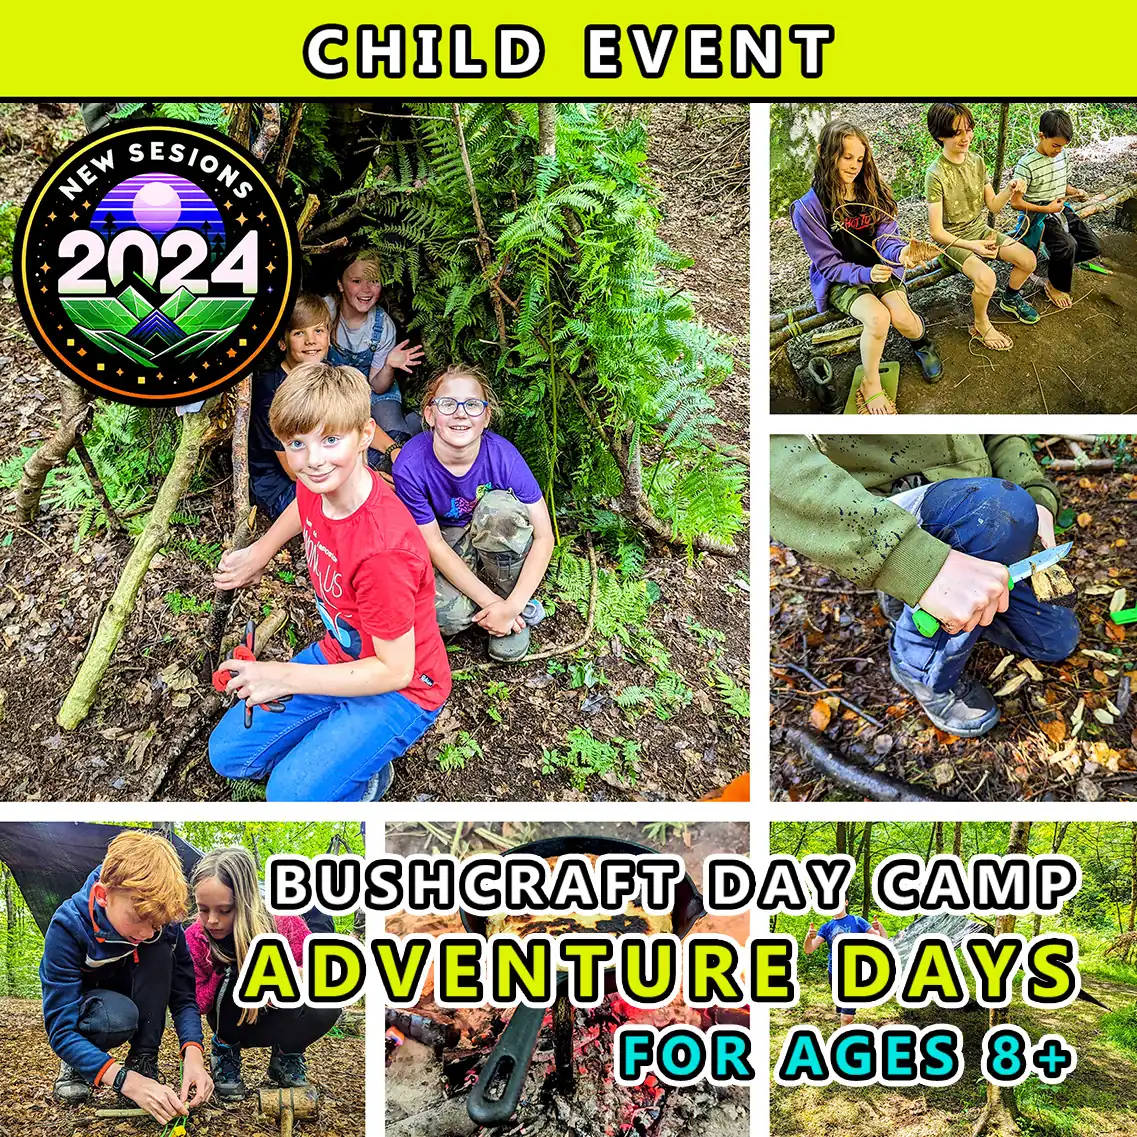 Child adventure days for ages 8 to 17 bushcraft day camp at TRIBE new for 2024